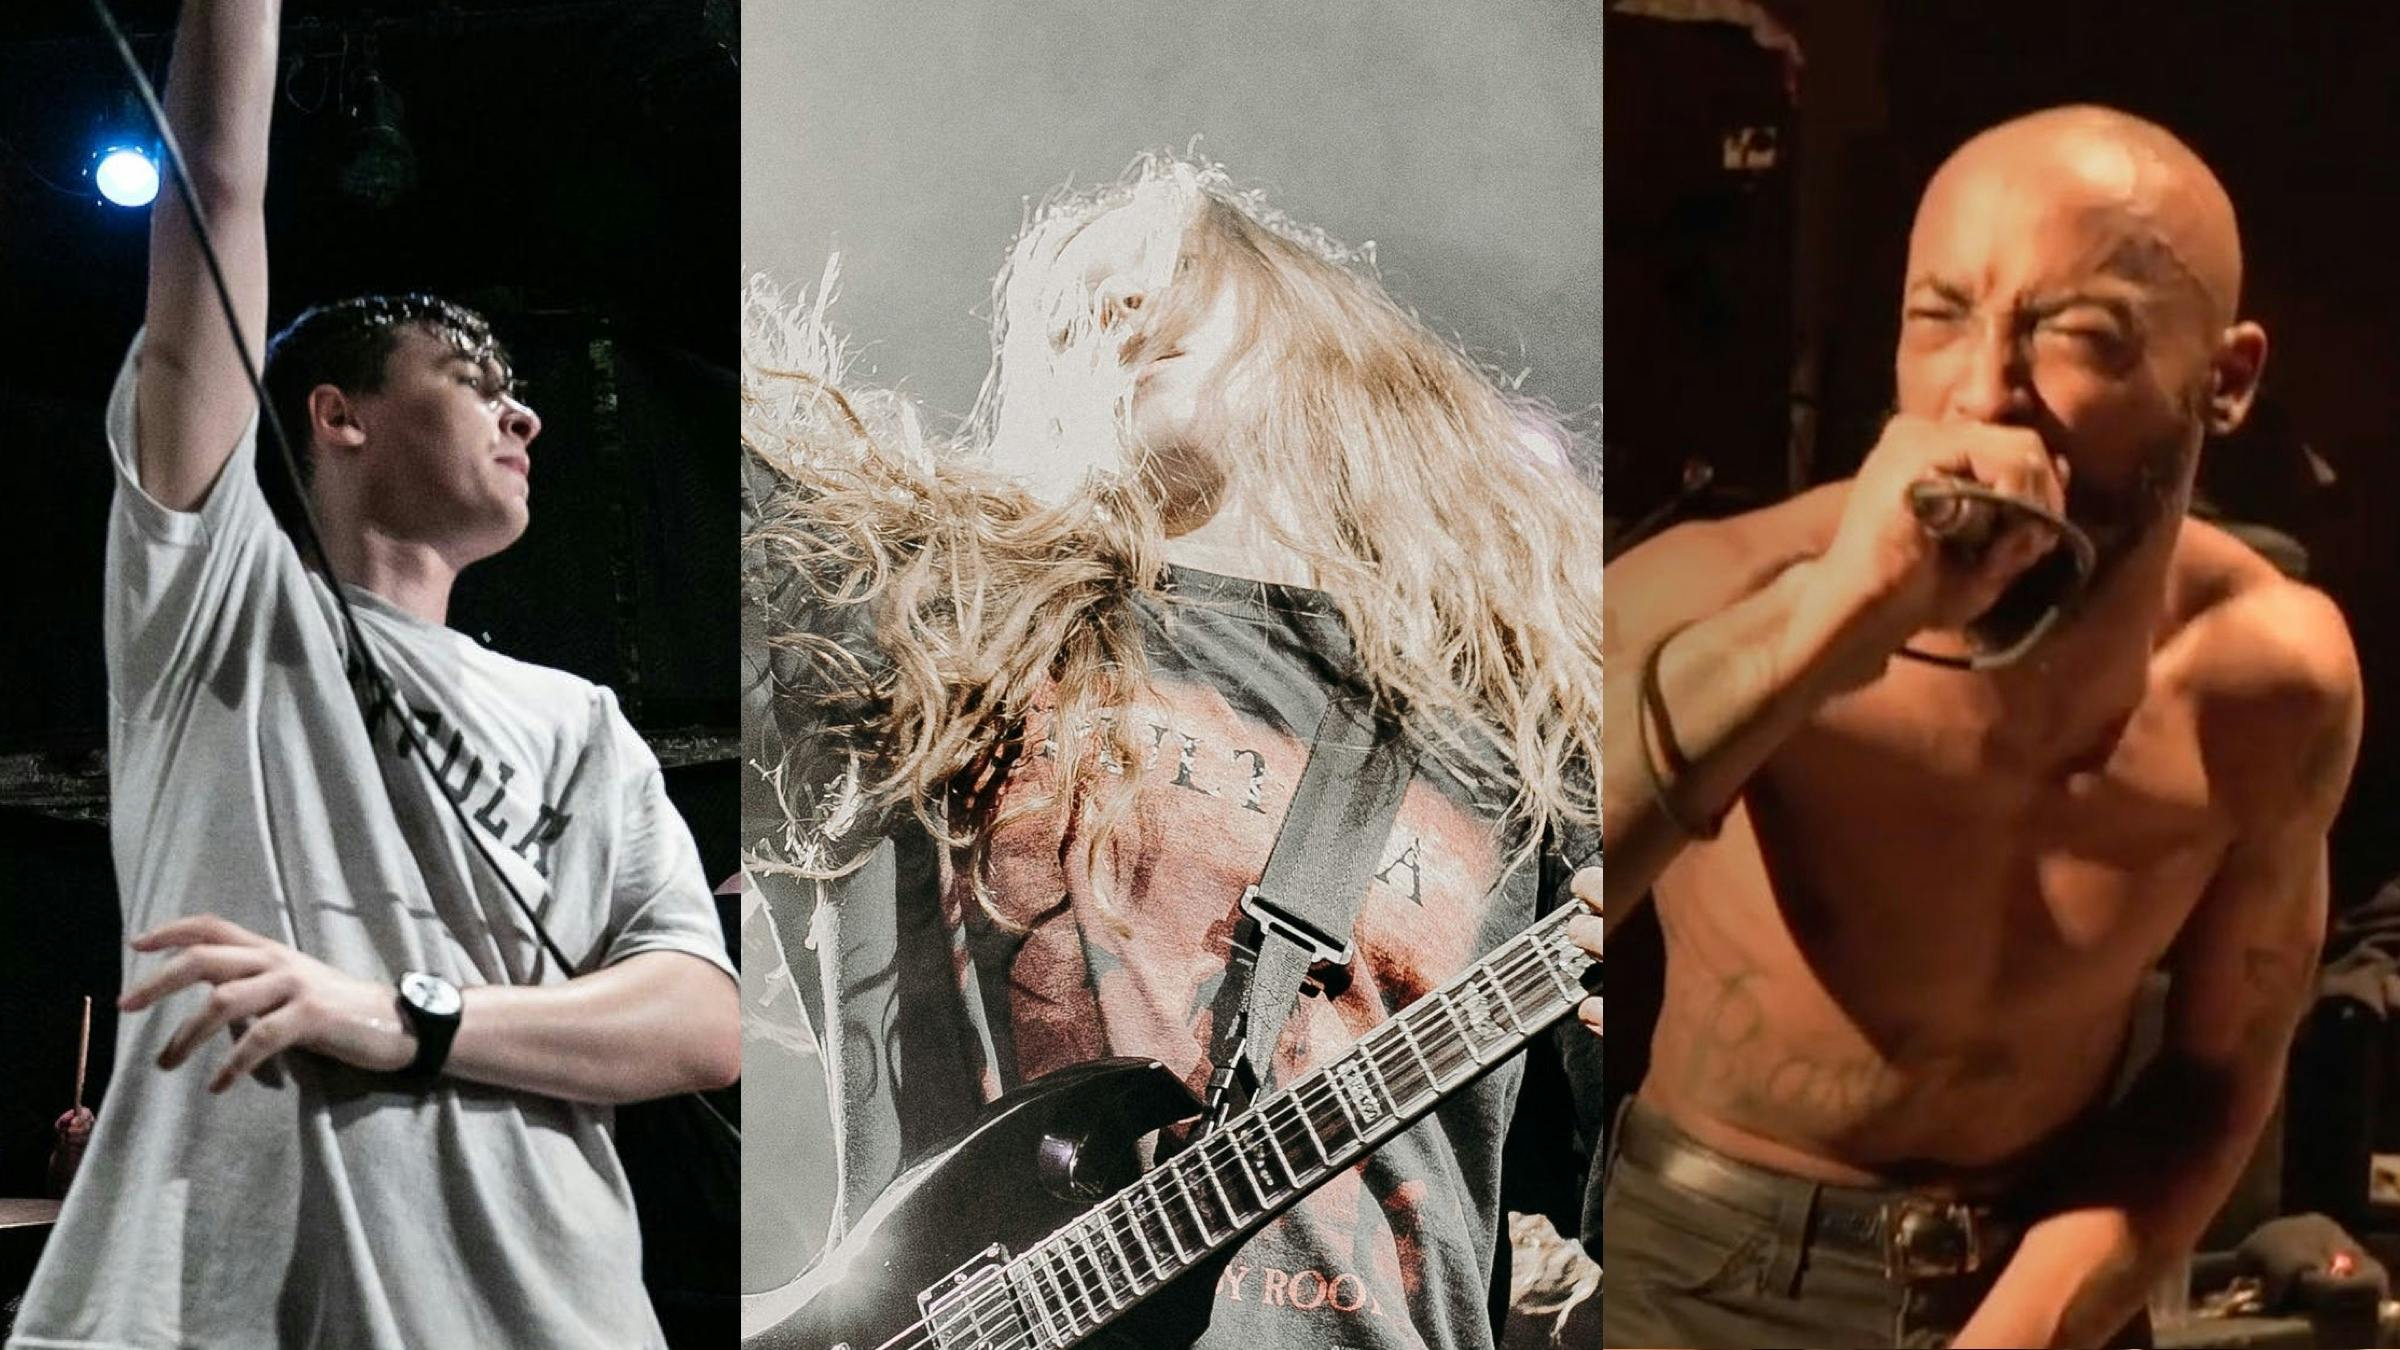 The 10 greatest vocalists in hardcore right now